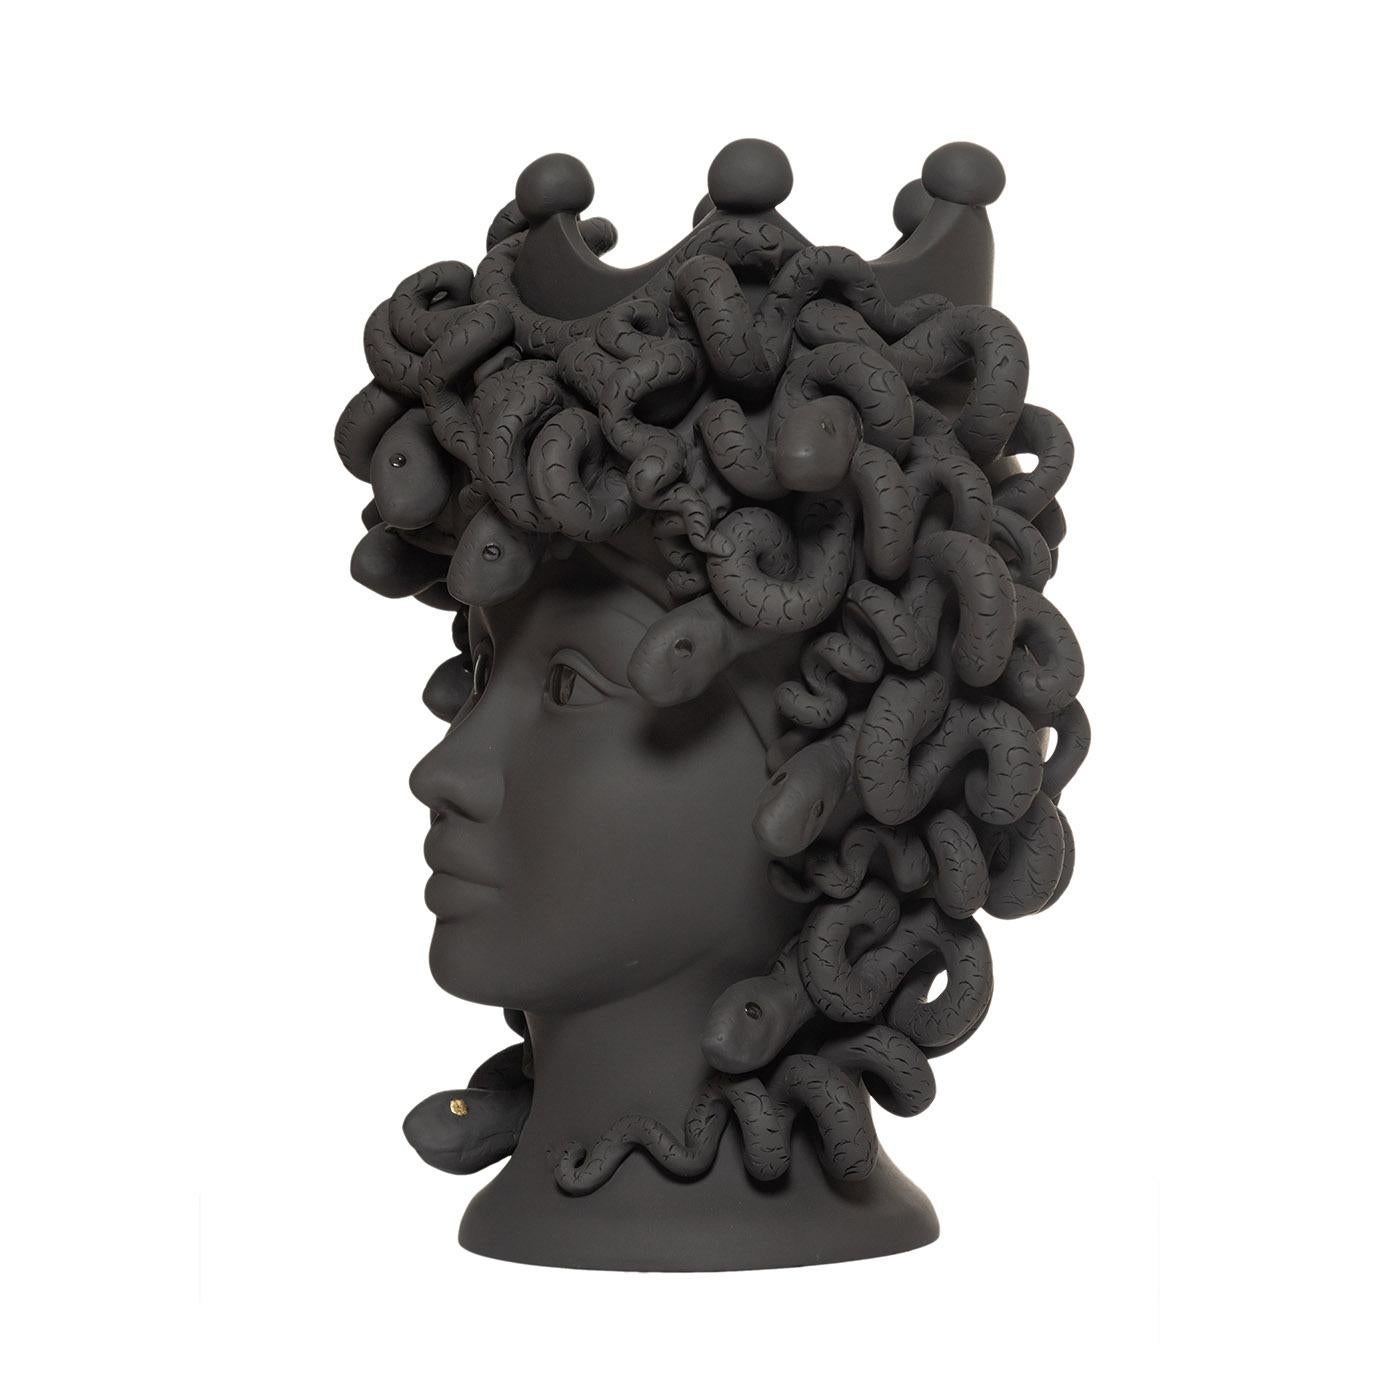 This entirely handmade vase is inspired by the Greek myth of the most famous among the three Gorgons. The vase has a matte finish, with a particularly intense tint between a very dark brown color and black. The eyes, both the girl's and snakes' -